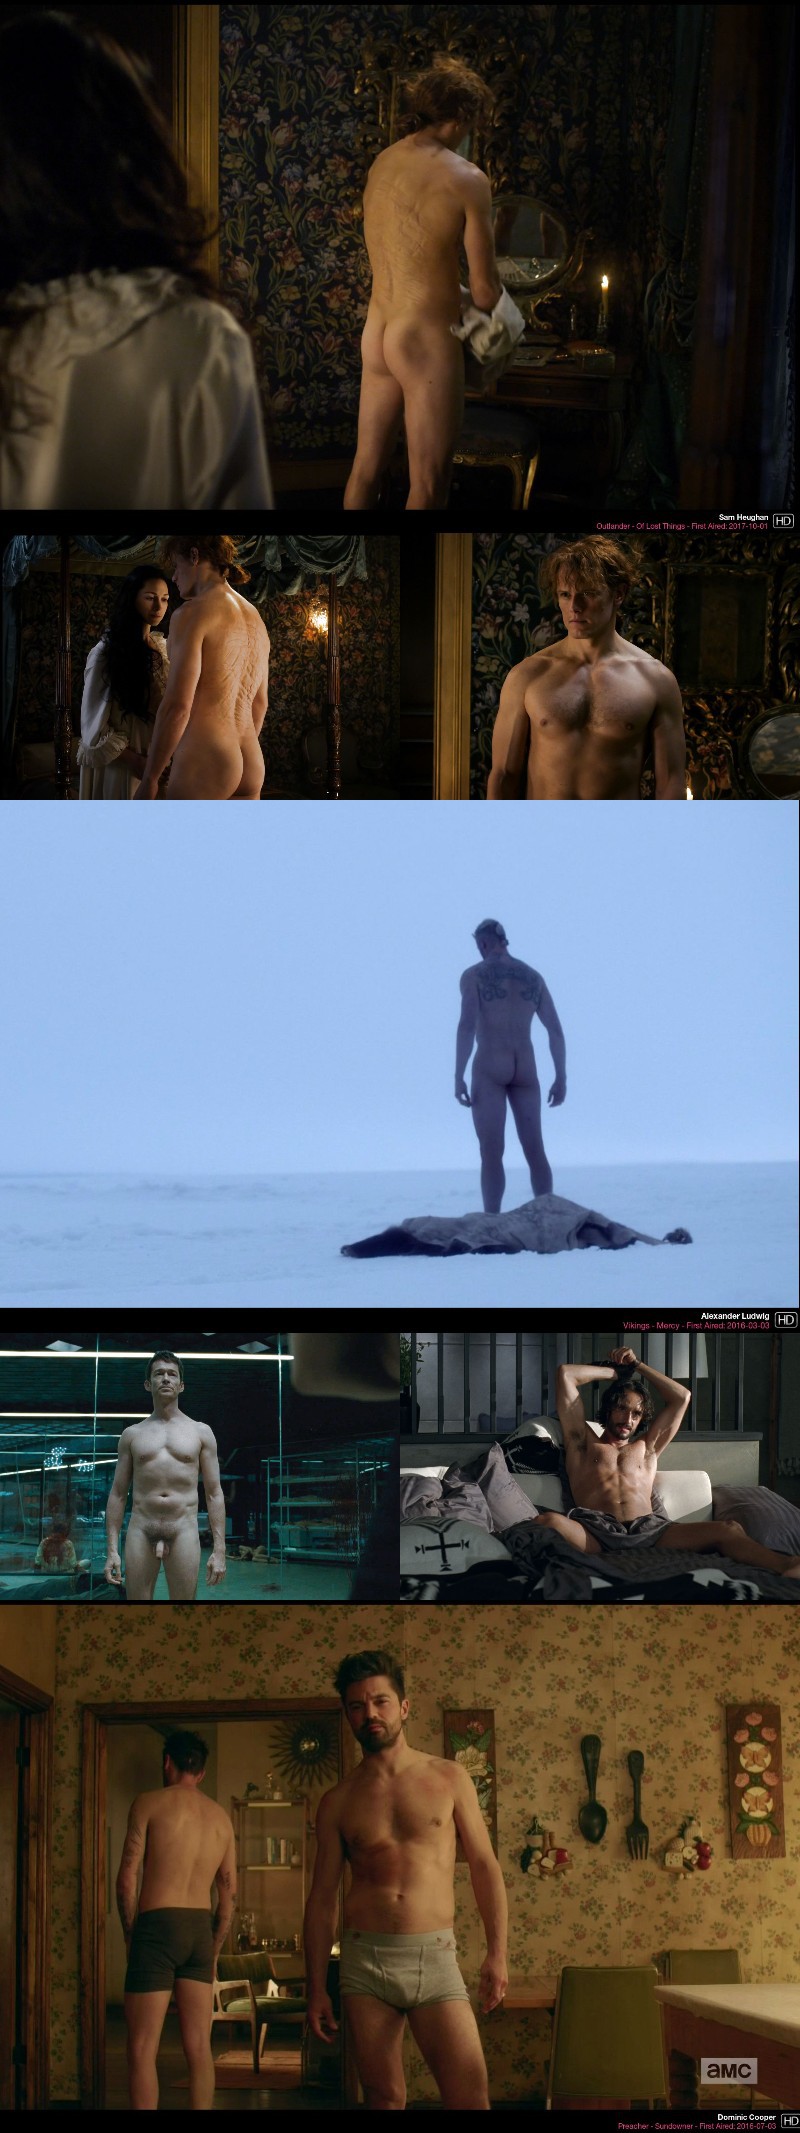 TV Nudity Post "Game of Thrones"